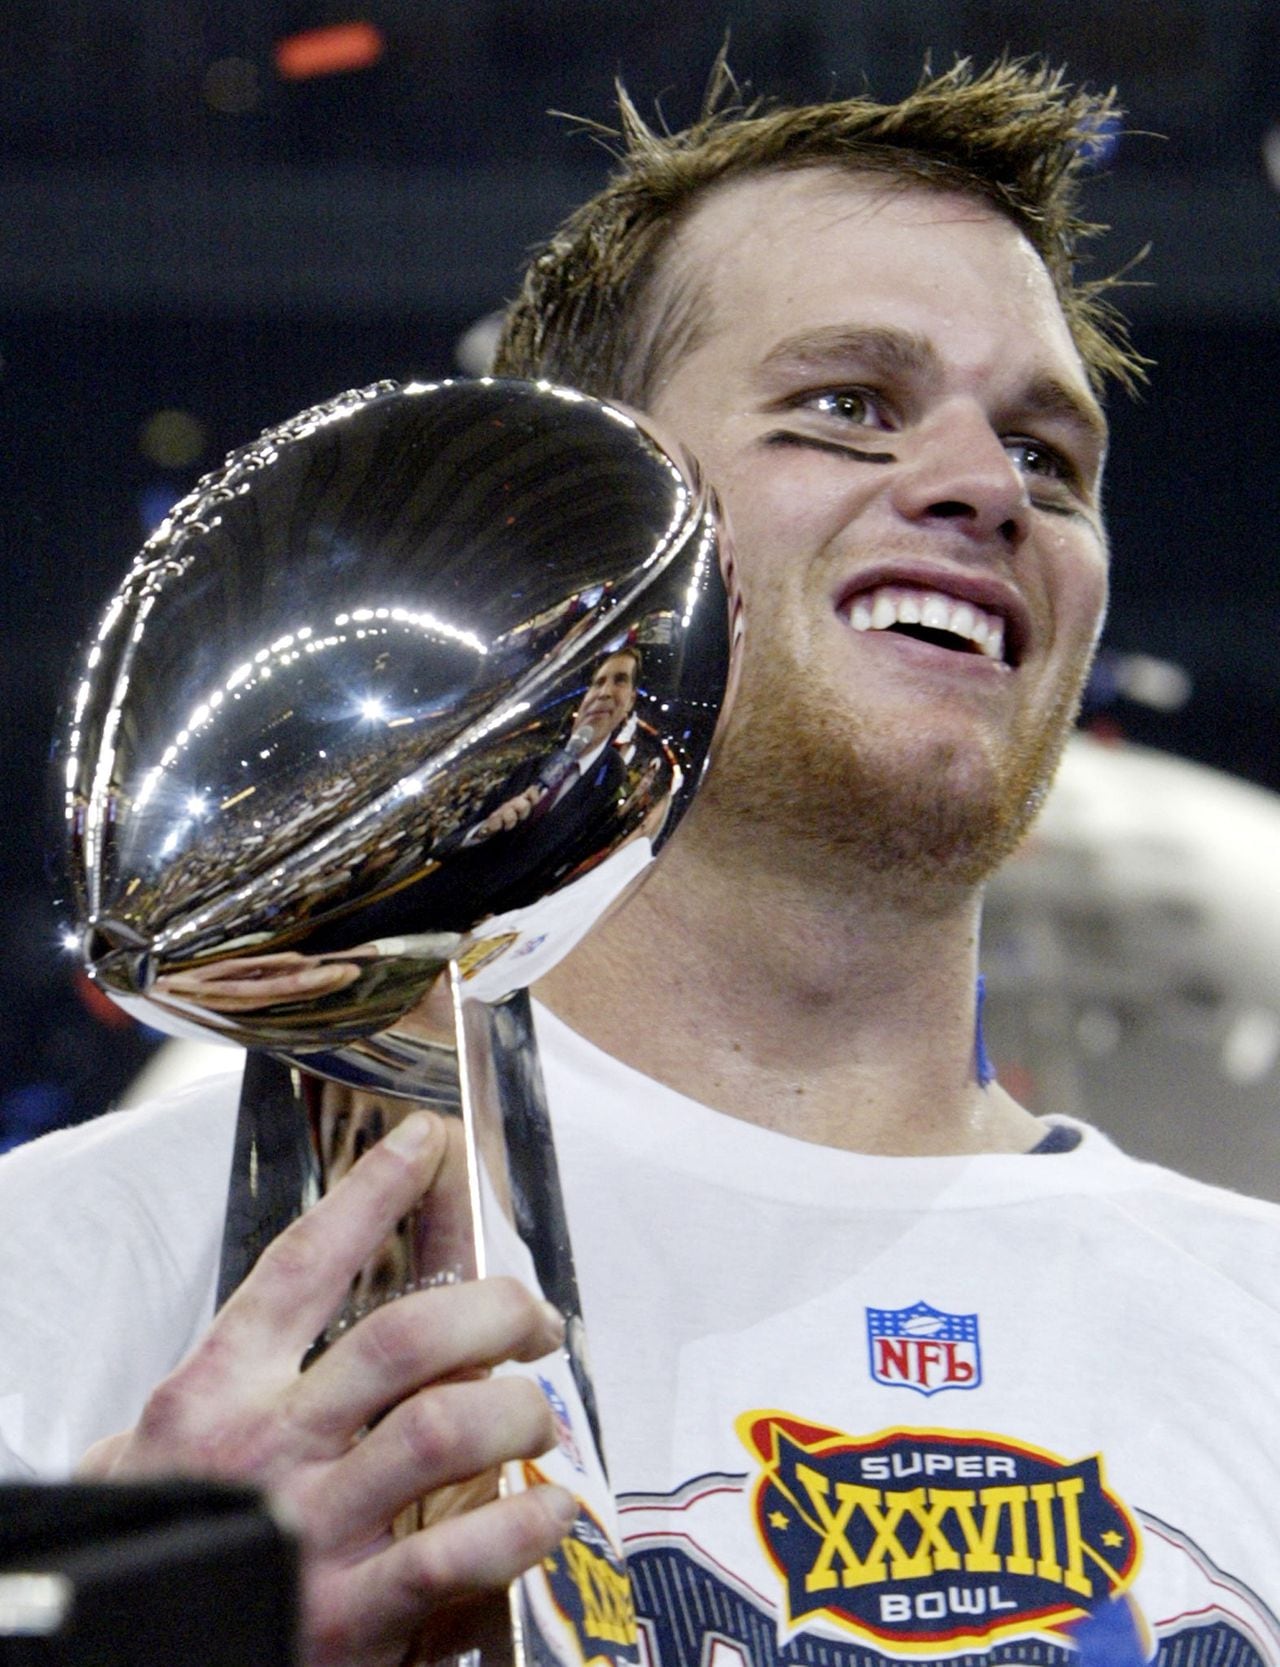 (FILES) In this file photo taken on JFebruary 1, 2004, Quarterback Tom Brady of the New England Patriots holds the Vince Lombardi trophy after winning Super Bowl XXXVIII, at Reliant Stadium in Houston, Texas. - Brady announced his retirement on February 1, 2023, at the age of 45 after a storied career that included a record-breaking seventh Super Bowl victory in 2021 and a temporary retirement last year. "I'll get to the point right away: I'm retiring, for good," Brady said in a social media video. (Photo by JEFF HAYNES / AFP)